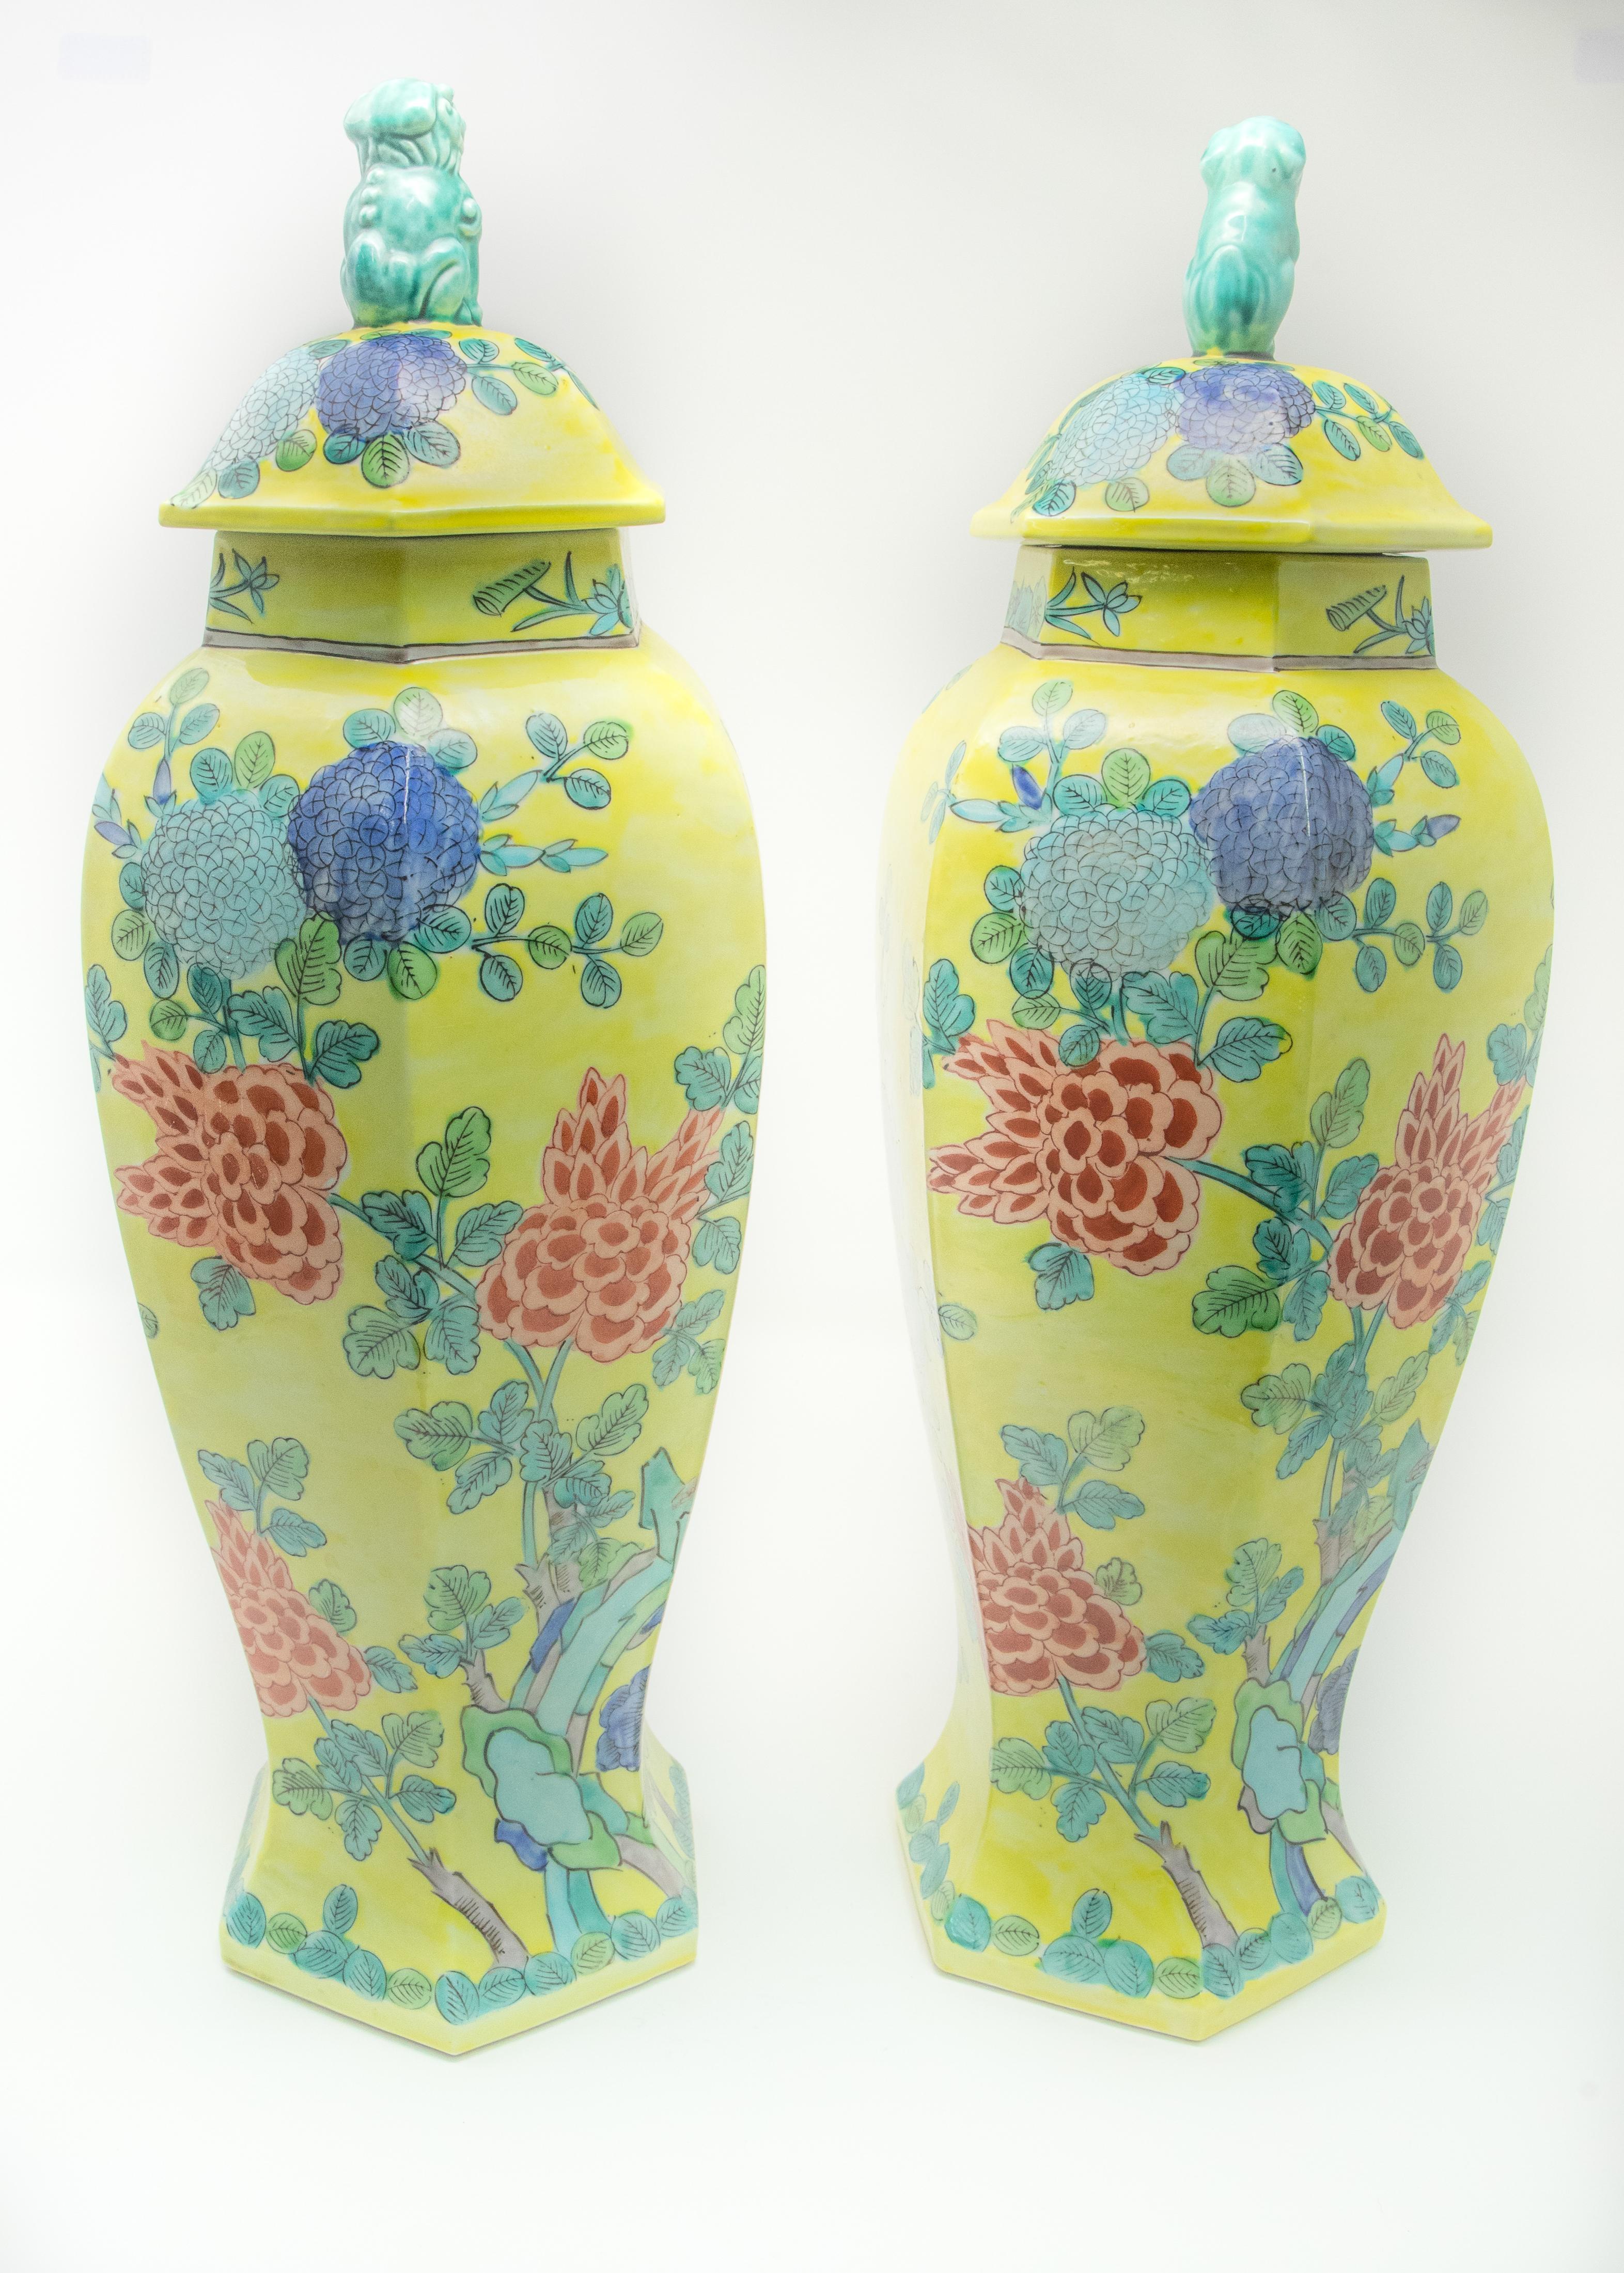 Pair of Chinese hand painted lidded urns. Striking yellow as the base color shows off the shape well. With turquoise, blues, reds, greens, and other wonderful colors making the foliate details. On top of the lids is turquoise painted foo-dogs.